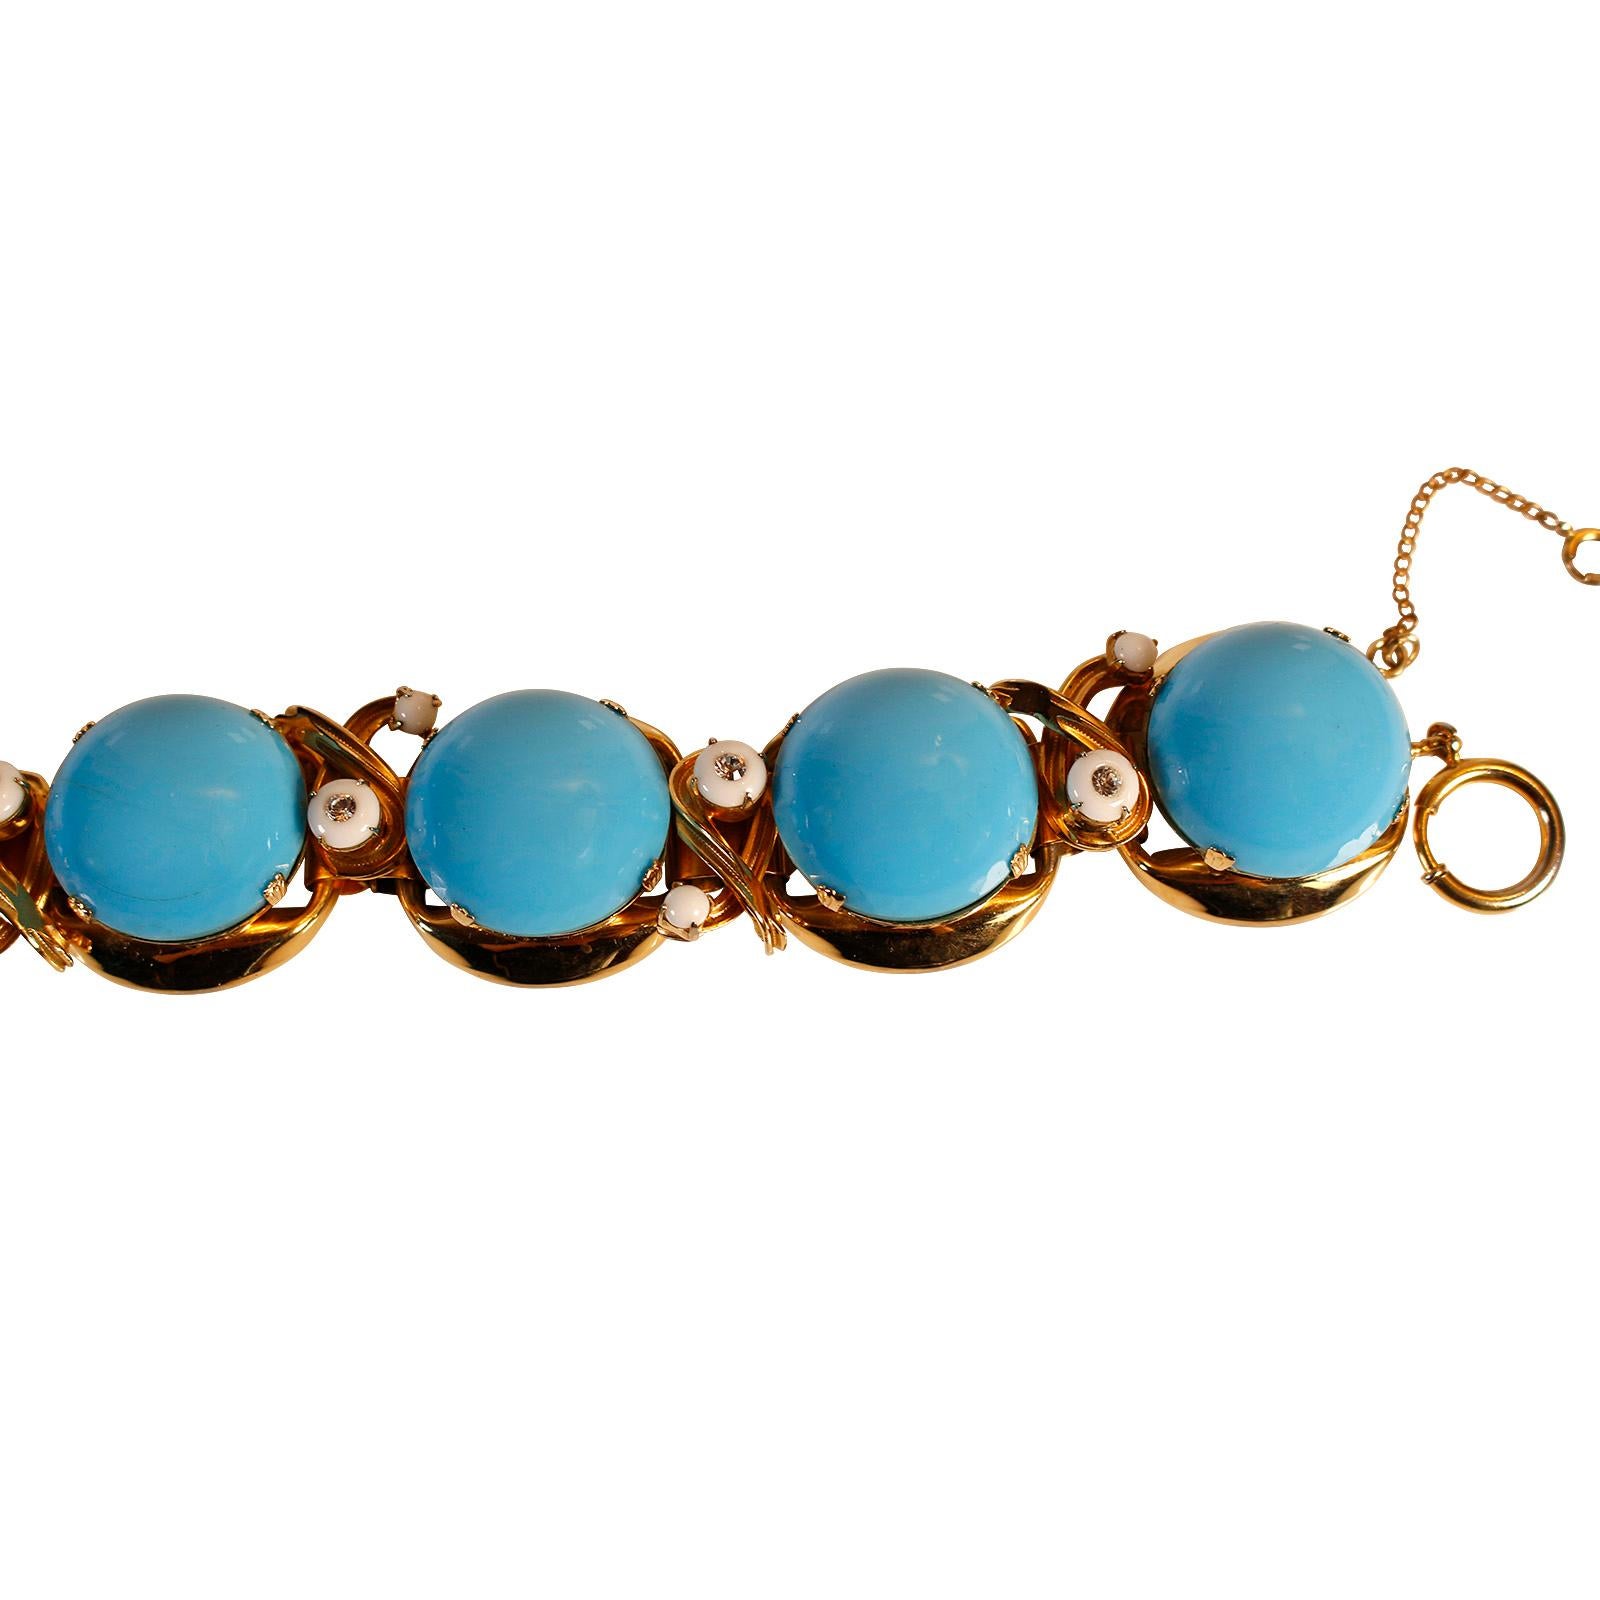 Vintage Unsigned Gold and Faux Turquoise Bracelet Circa 1960s For Sale 6